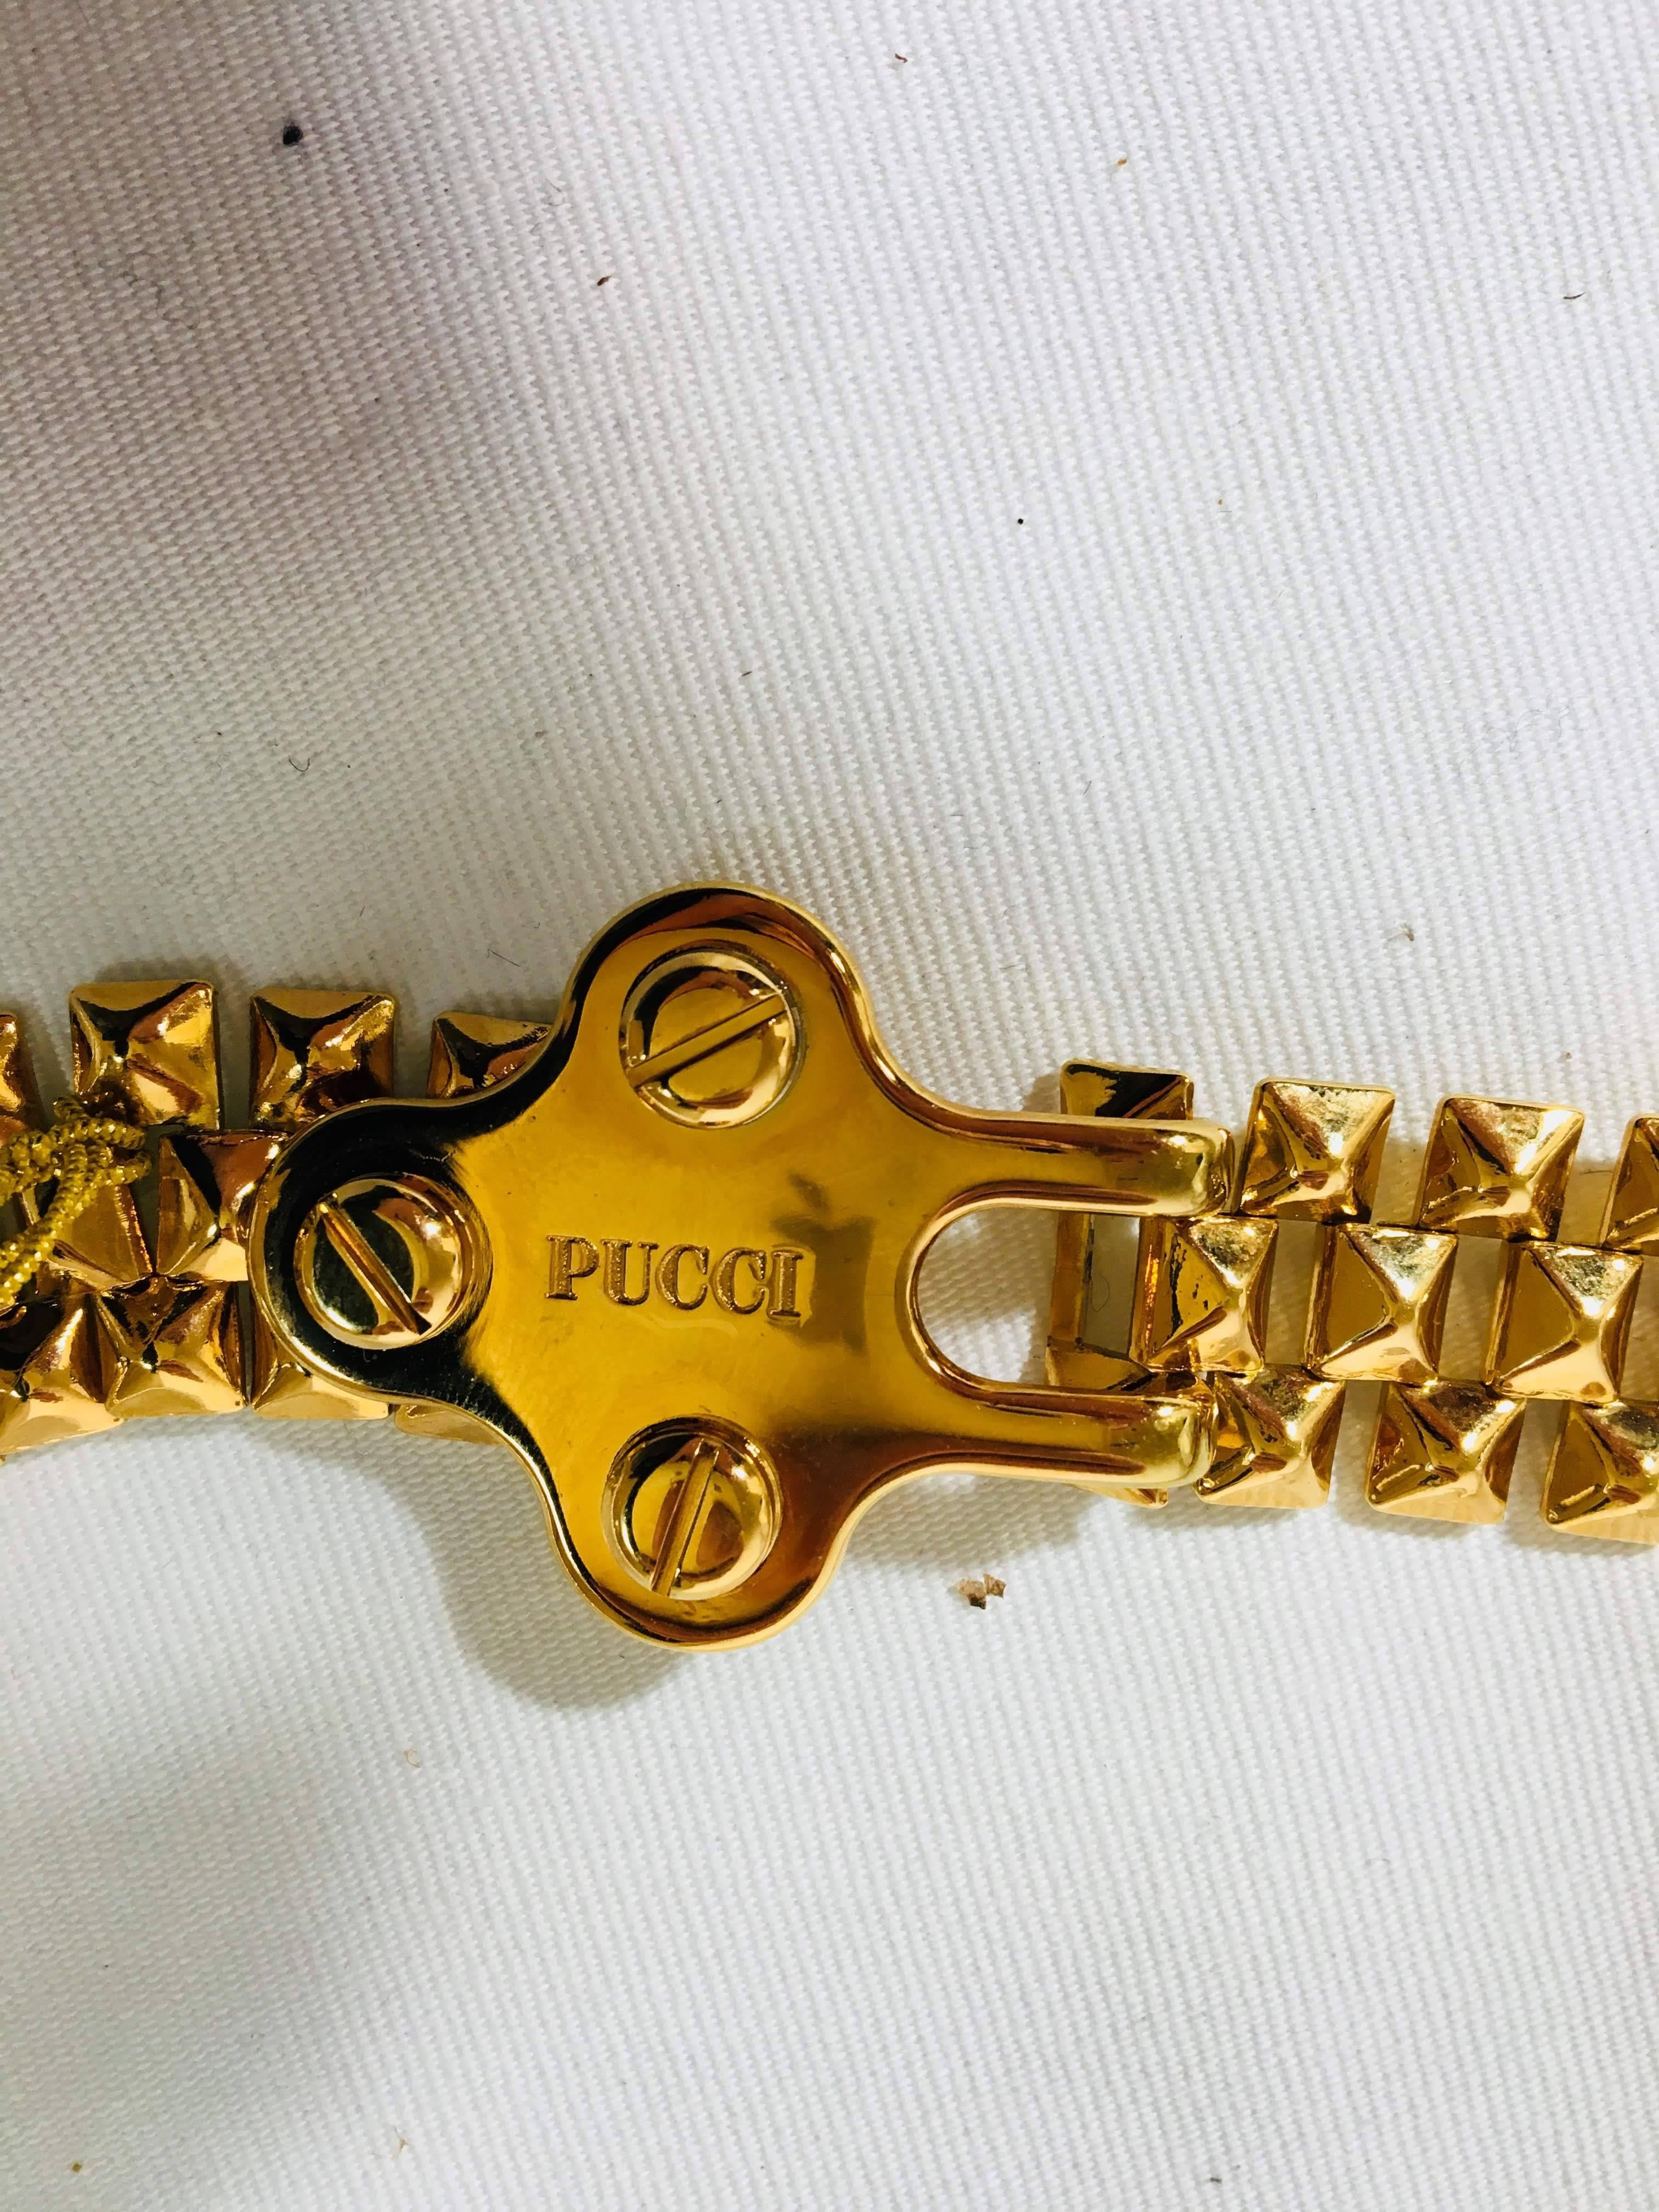 Pucci Stud Link Belt- 3 Gold Rows with Clover Shape Buckle.